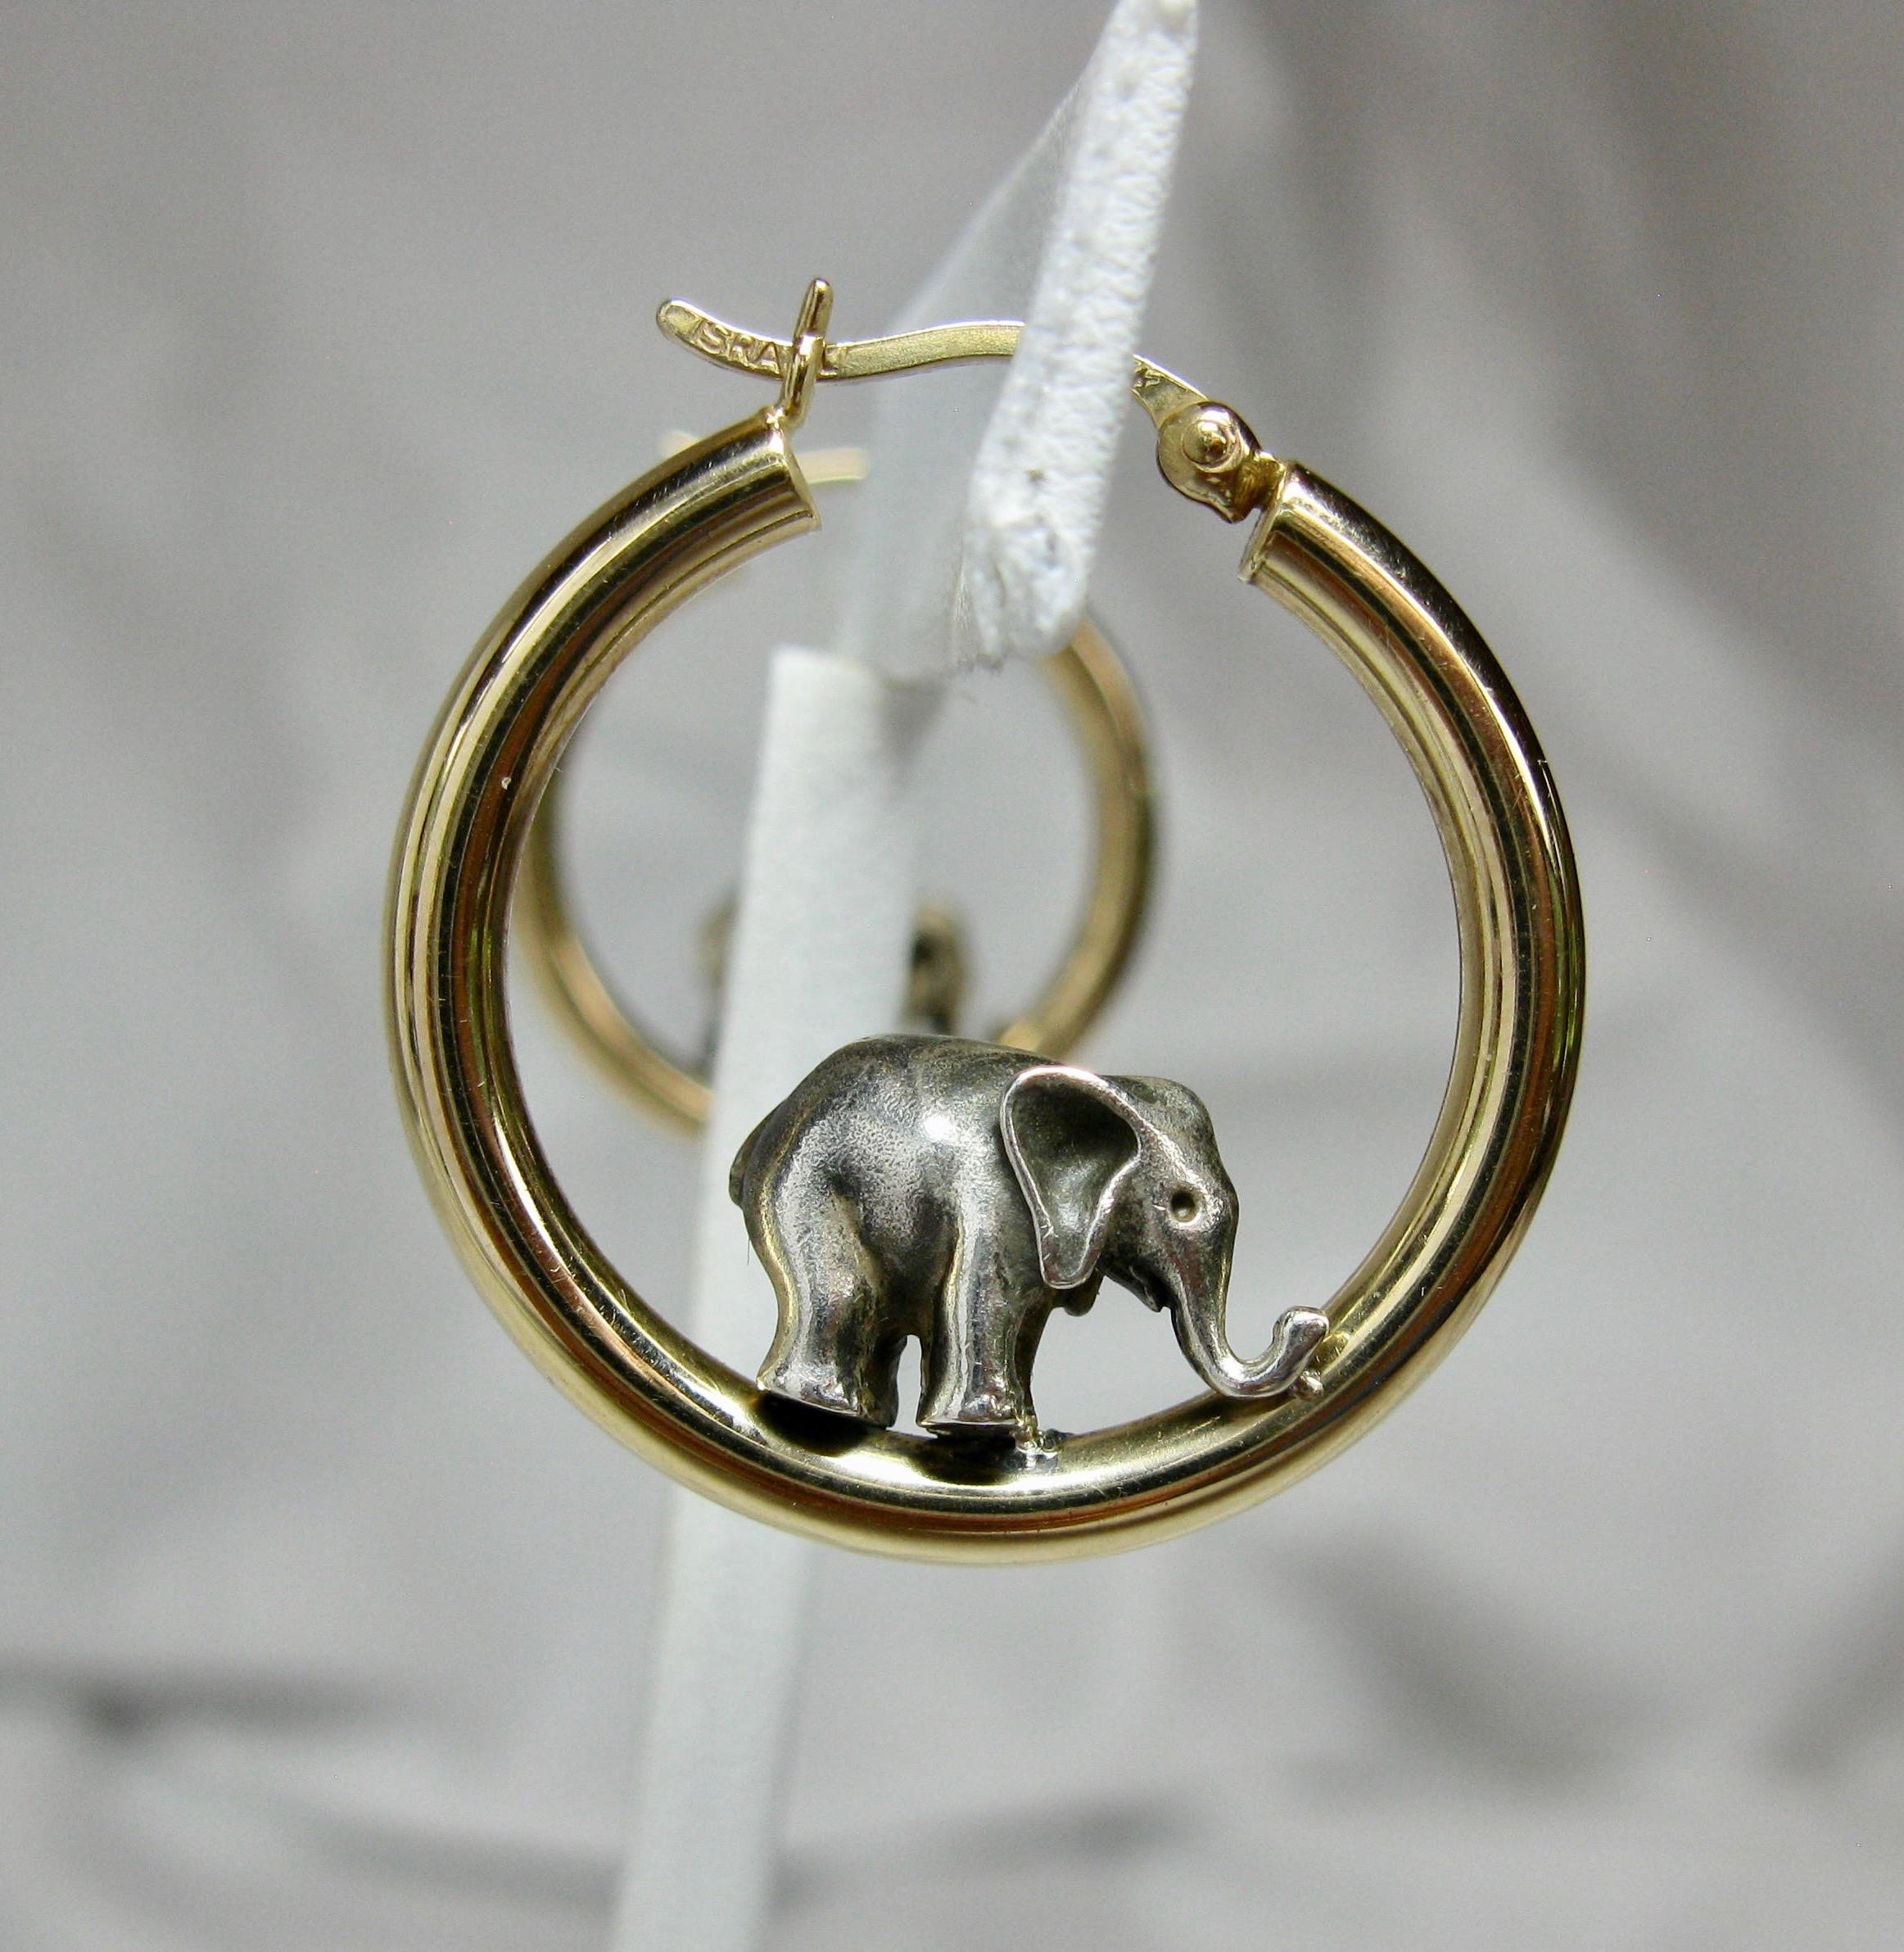 A charming pair of Elephant Earrings.  The adorable elephants are Sterling Silver and set in 14 Karat Yellow Gold Hoops.  How wonderful!

The earrings are 1 inch (26mm)  in diameter.
They are hallmarked PBD 925 14K Israel